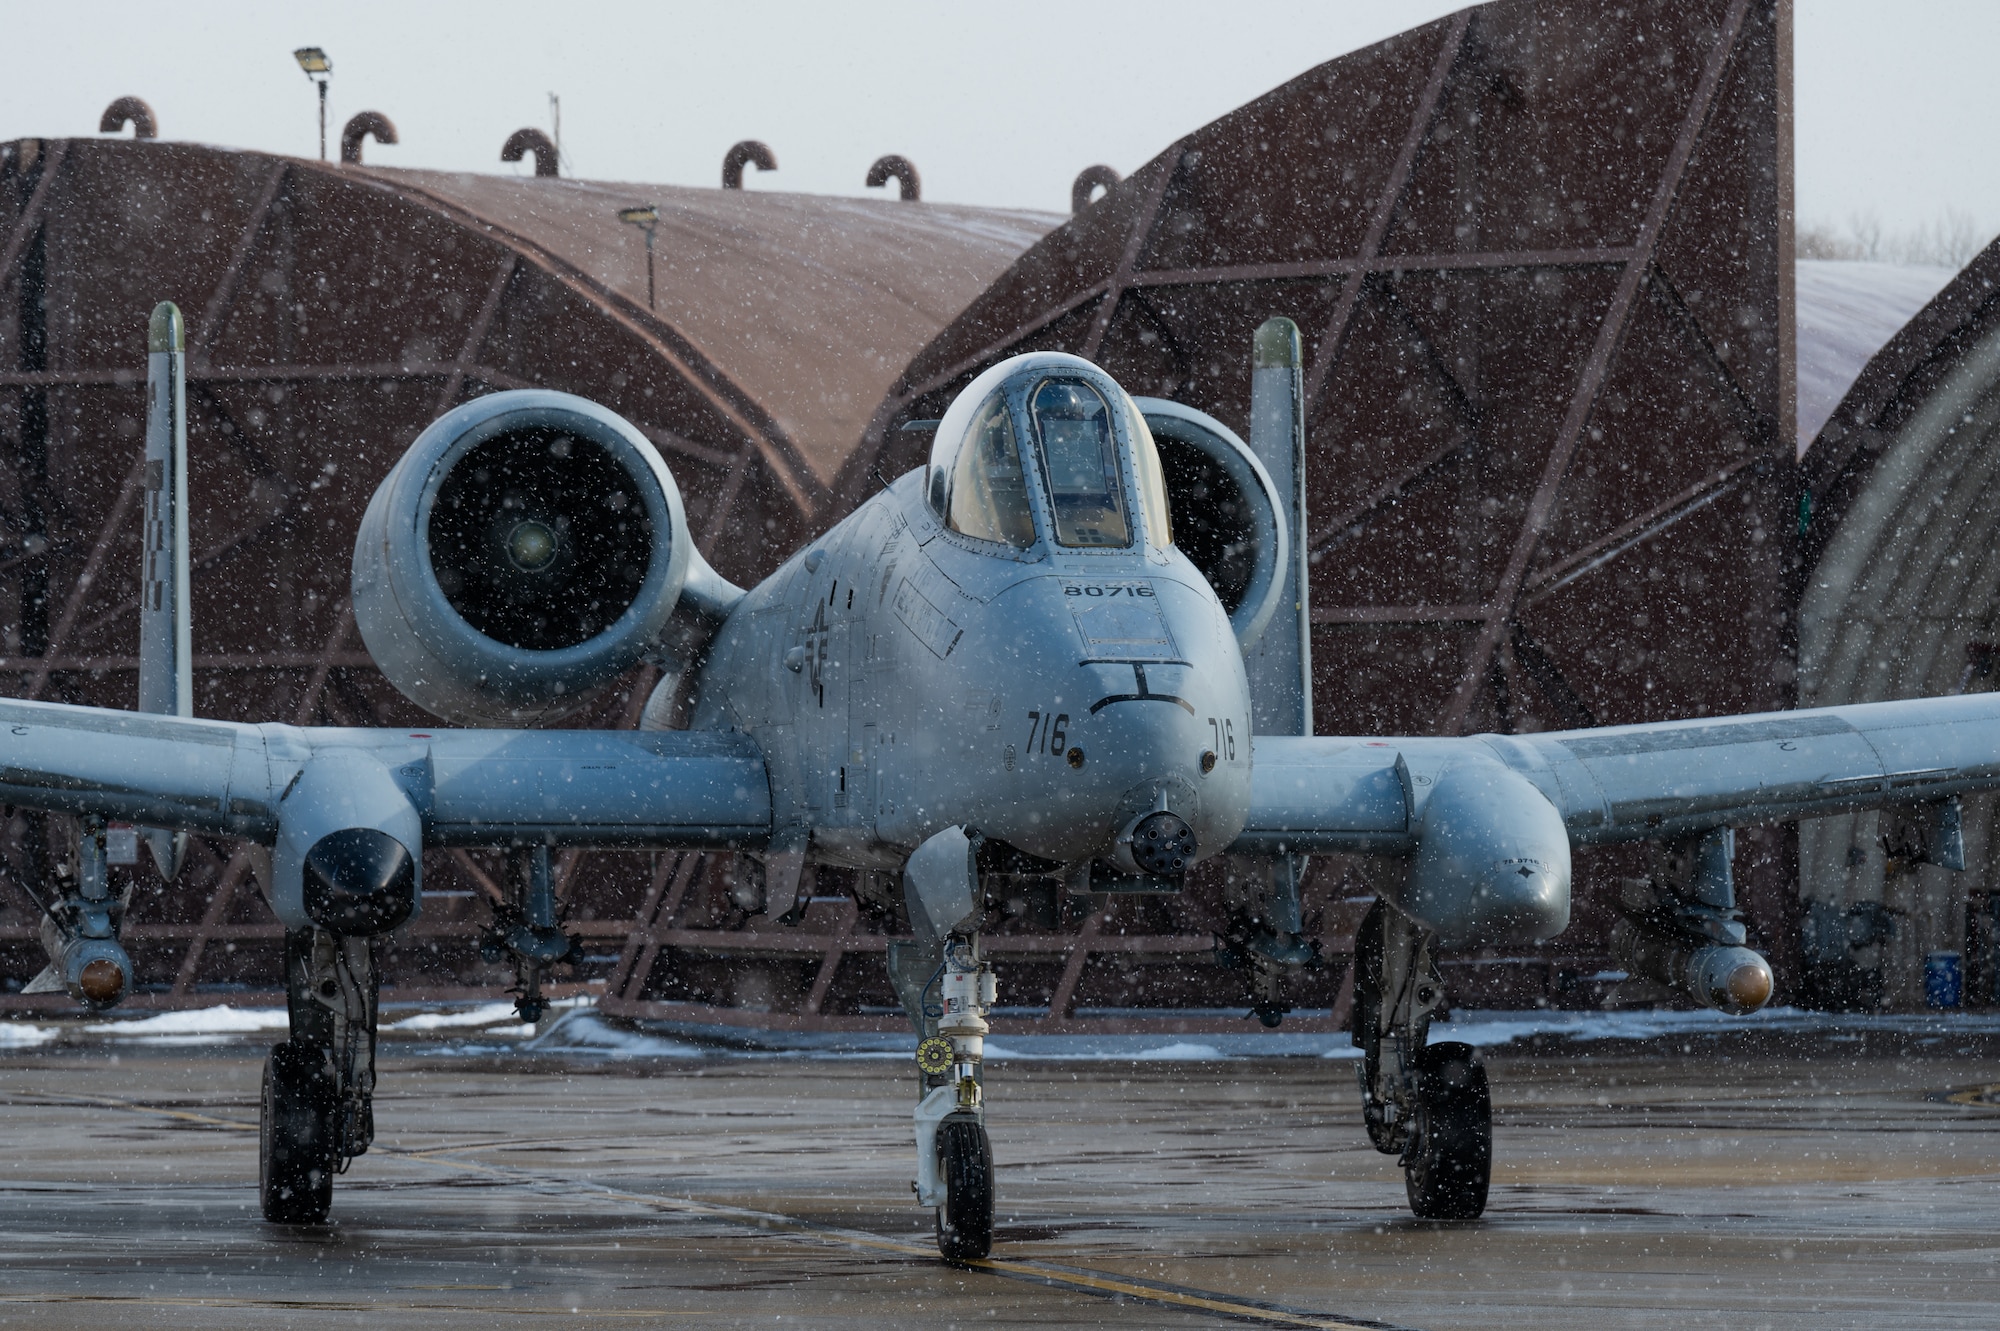 A U.S. Air Force A-10C Thunderbolt II from the 25th Fighter Squadron prepares to taxi to the runway at Osan Air Base, Republic of Korea, Jan. 22, 2024. Crew chiefs prevent accidents and collisions from occurring by signaling to the pilot when and where to move the aircraft prior to taxi. (U.S. Air Force photo by Airman 1st Class Chase Verzaal)